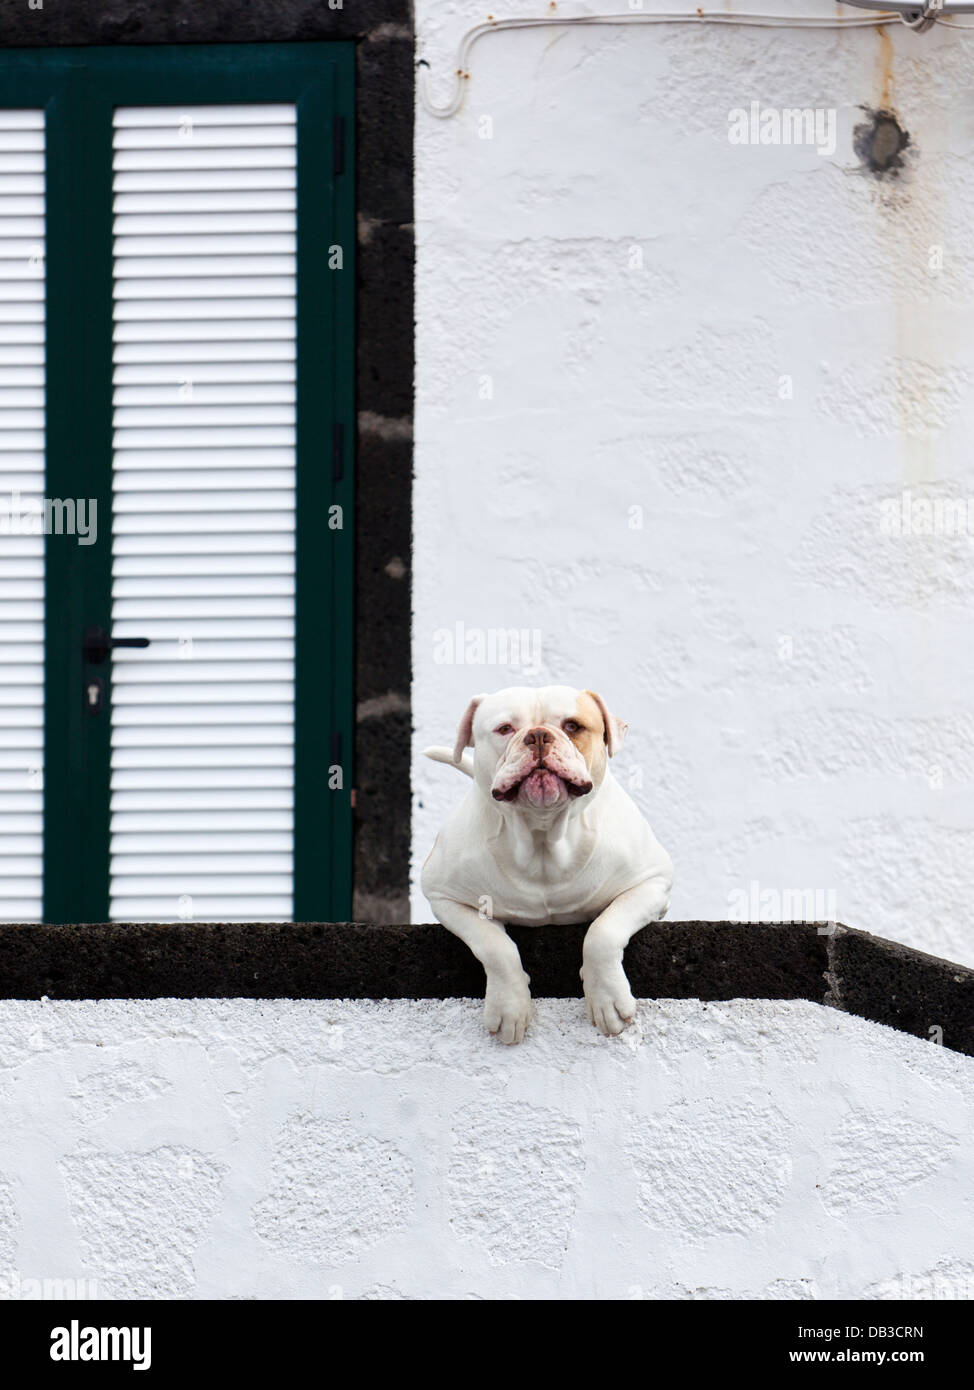 Attentive watchdog of Molosser breed, guarding a house entrance. Stock Photo